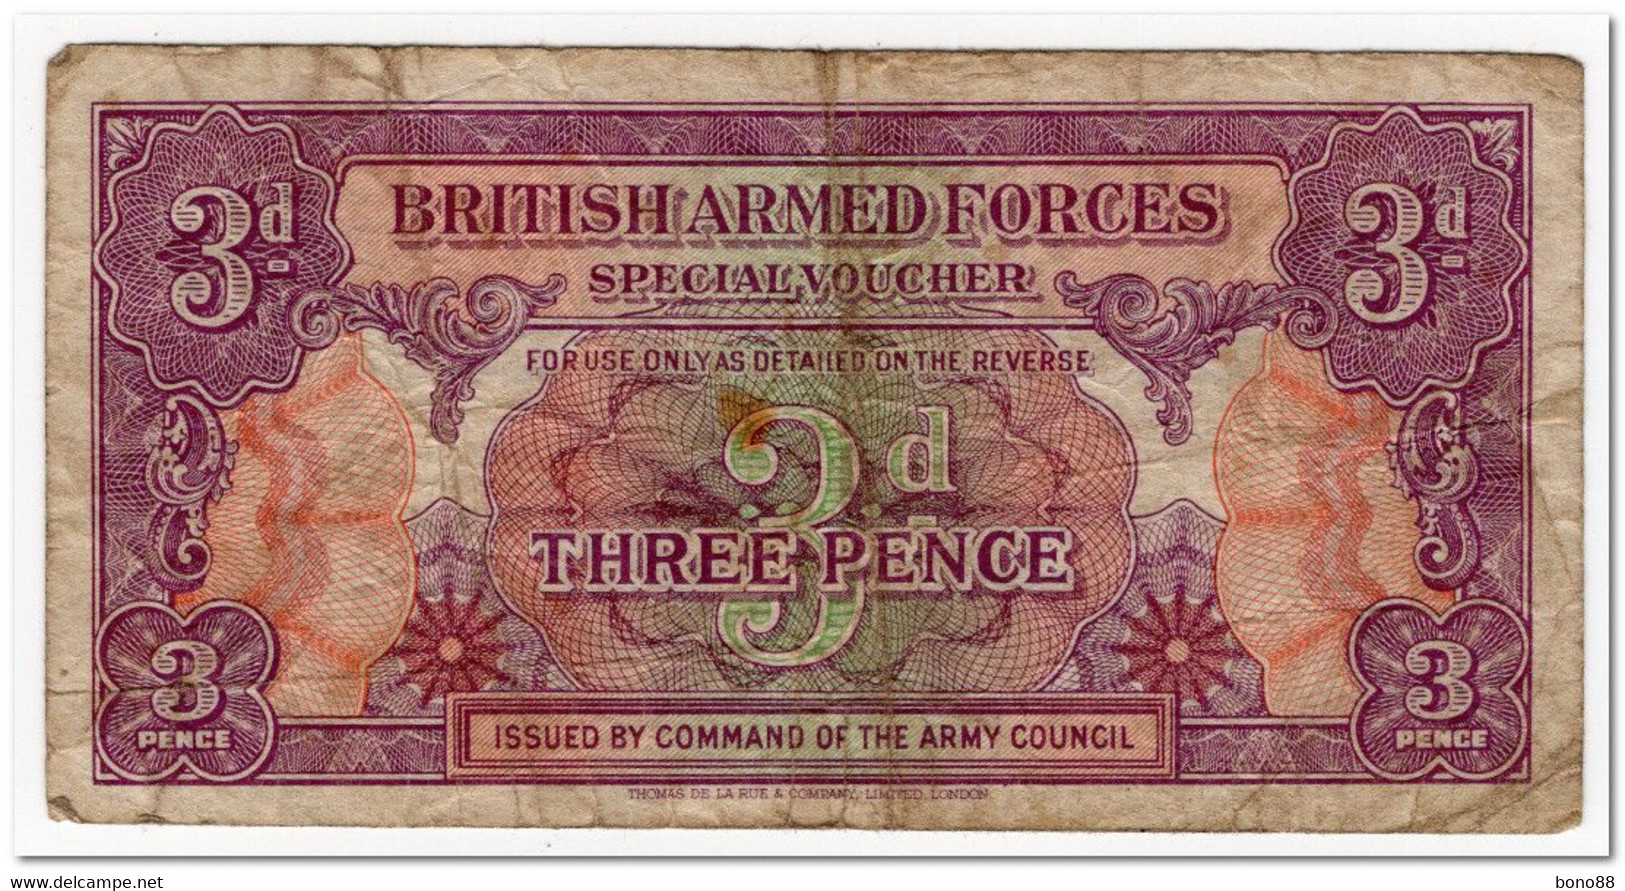 GREAT BRITAIN,BRITISH ARMED FORCES,3 PENCE,1946,P.M9,CIRCULATED - British Armed Forces & Special Vouchers